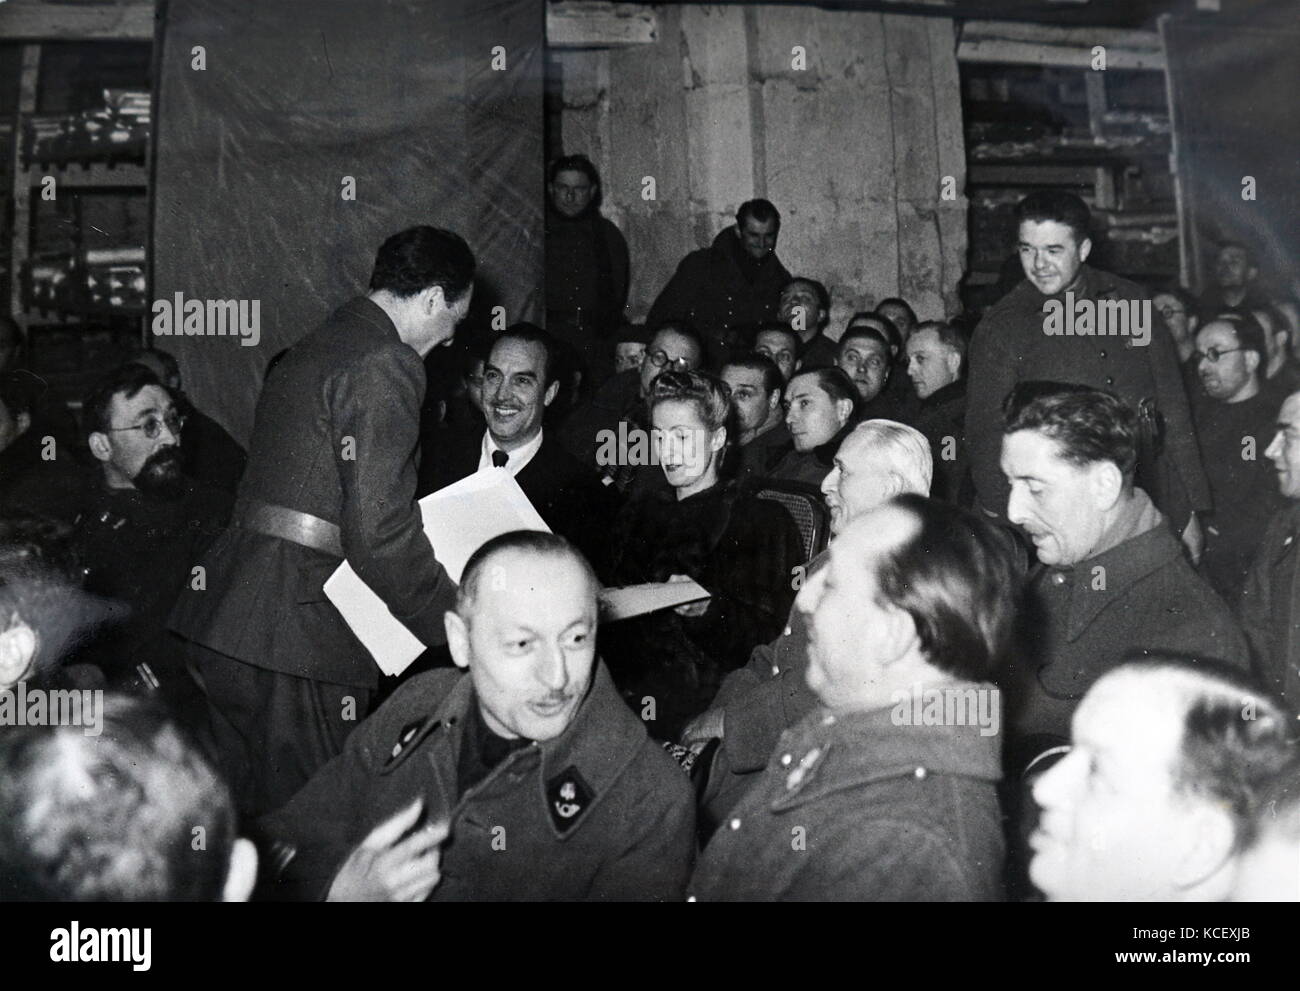 Photograph of a film screening in Paris, during the German occupation of France in World War Two. 1940. Danielle Darrieux and was present in the Army Cinema as the film 'Battements de Coeur ' (heartbeats), was shown. 1940 Danielle Yvonne Marie Antoinette Darrieux (born 1 May 1917) French actress and singer. Henri Decoin (1890 – 1969) was a French film director and screenwriter. Dated 20th Century Stock Photo